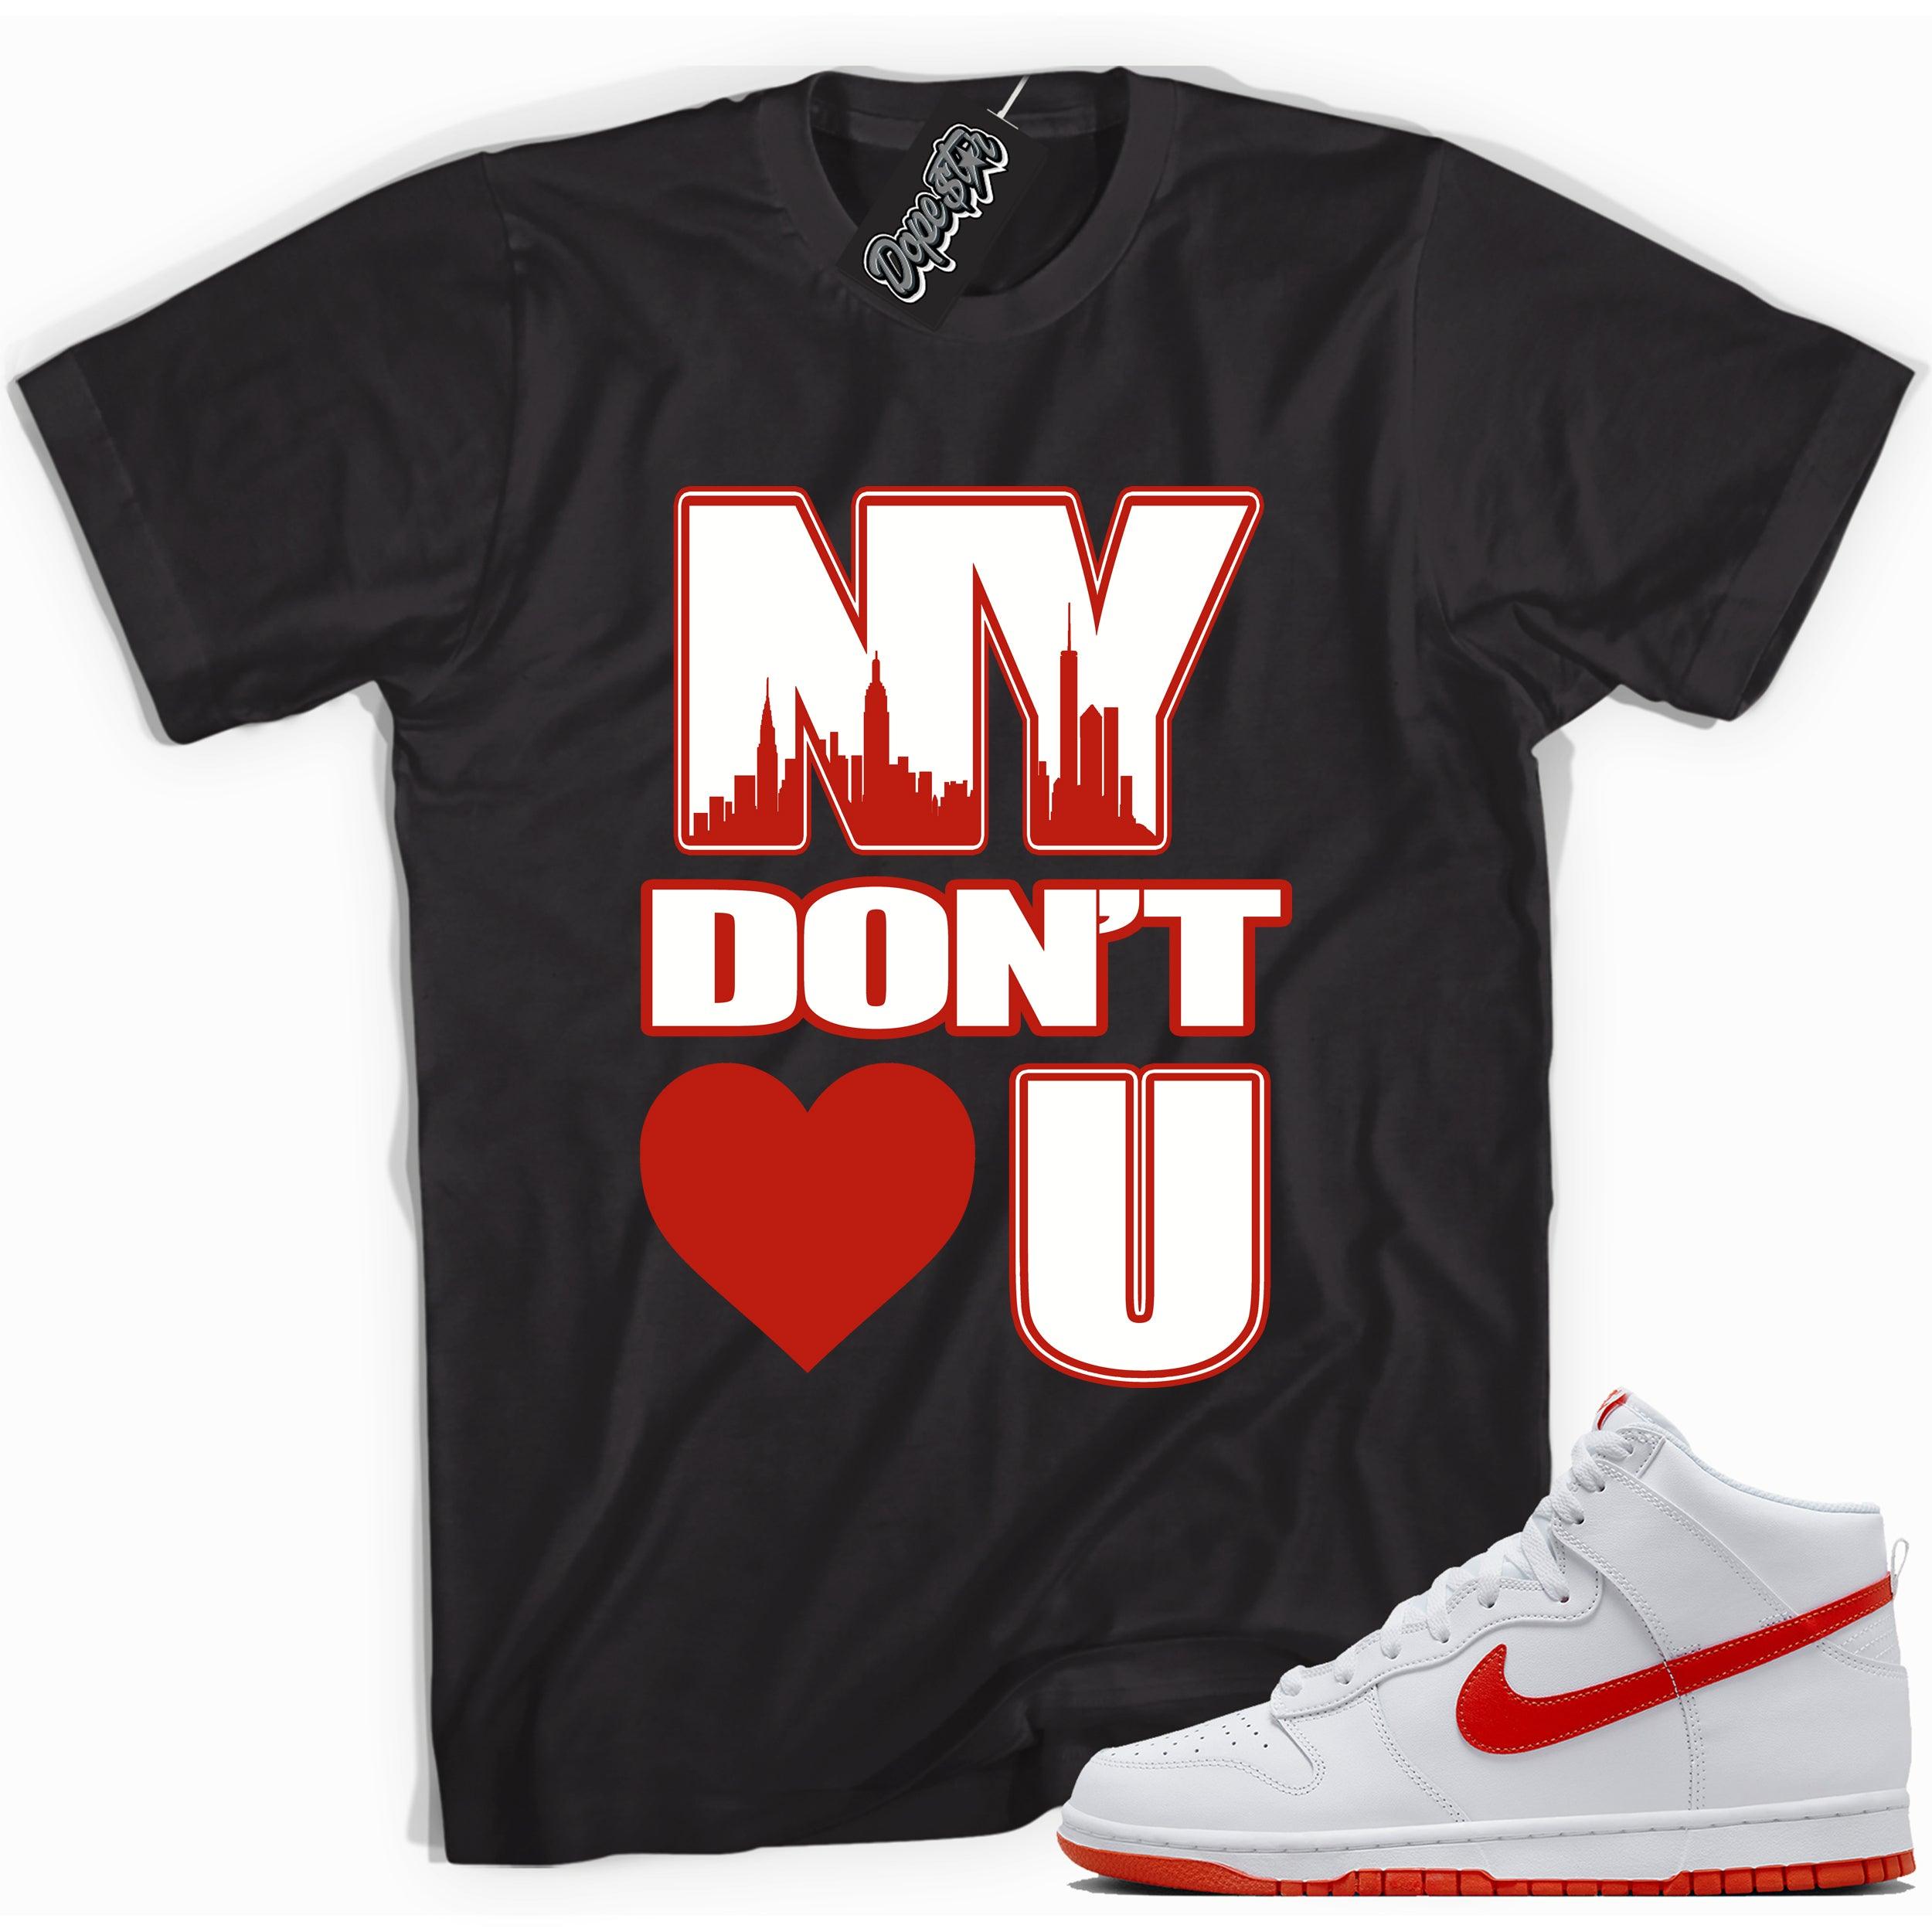 Cool black graphic tee with 'New york don't love you' print, that perfectly matches Nike Dunk High White Picante Red sneakers.